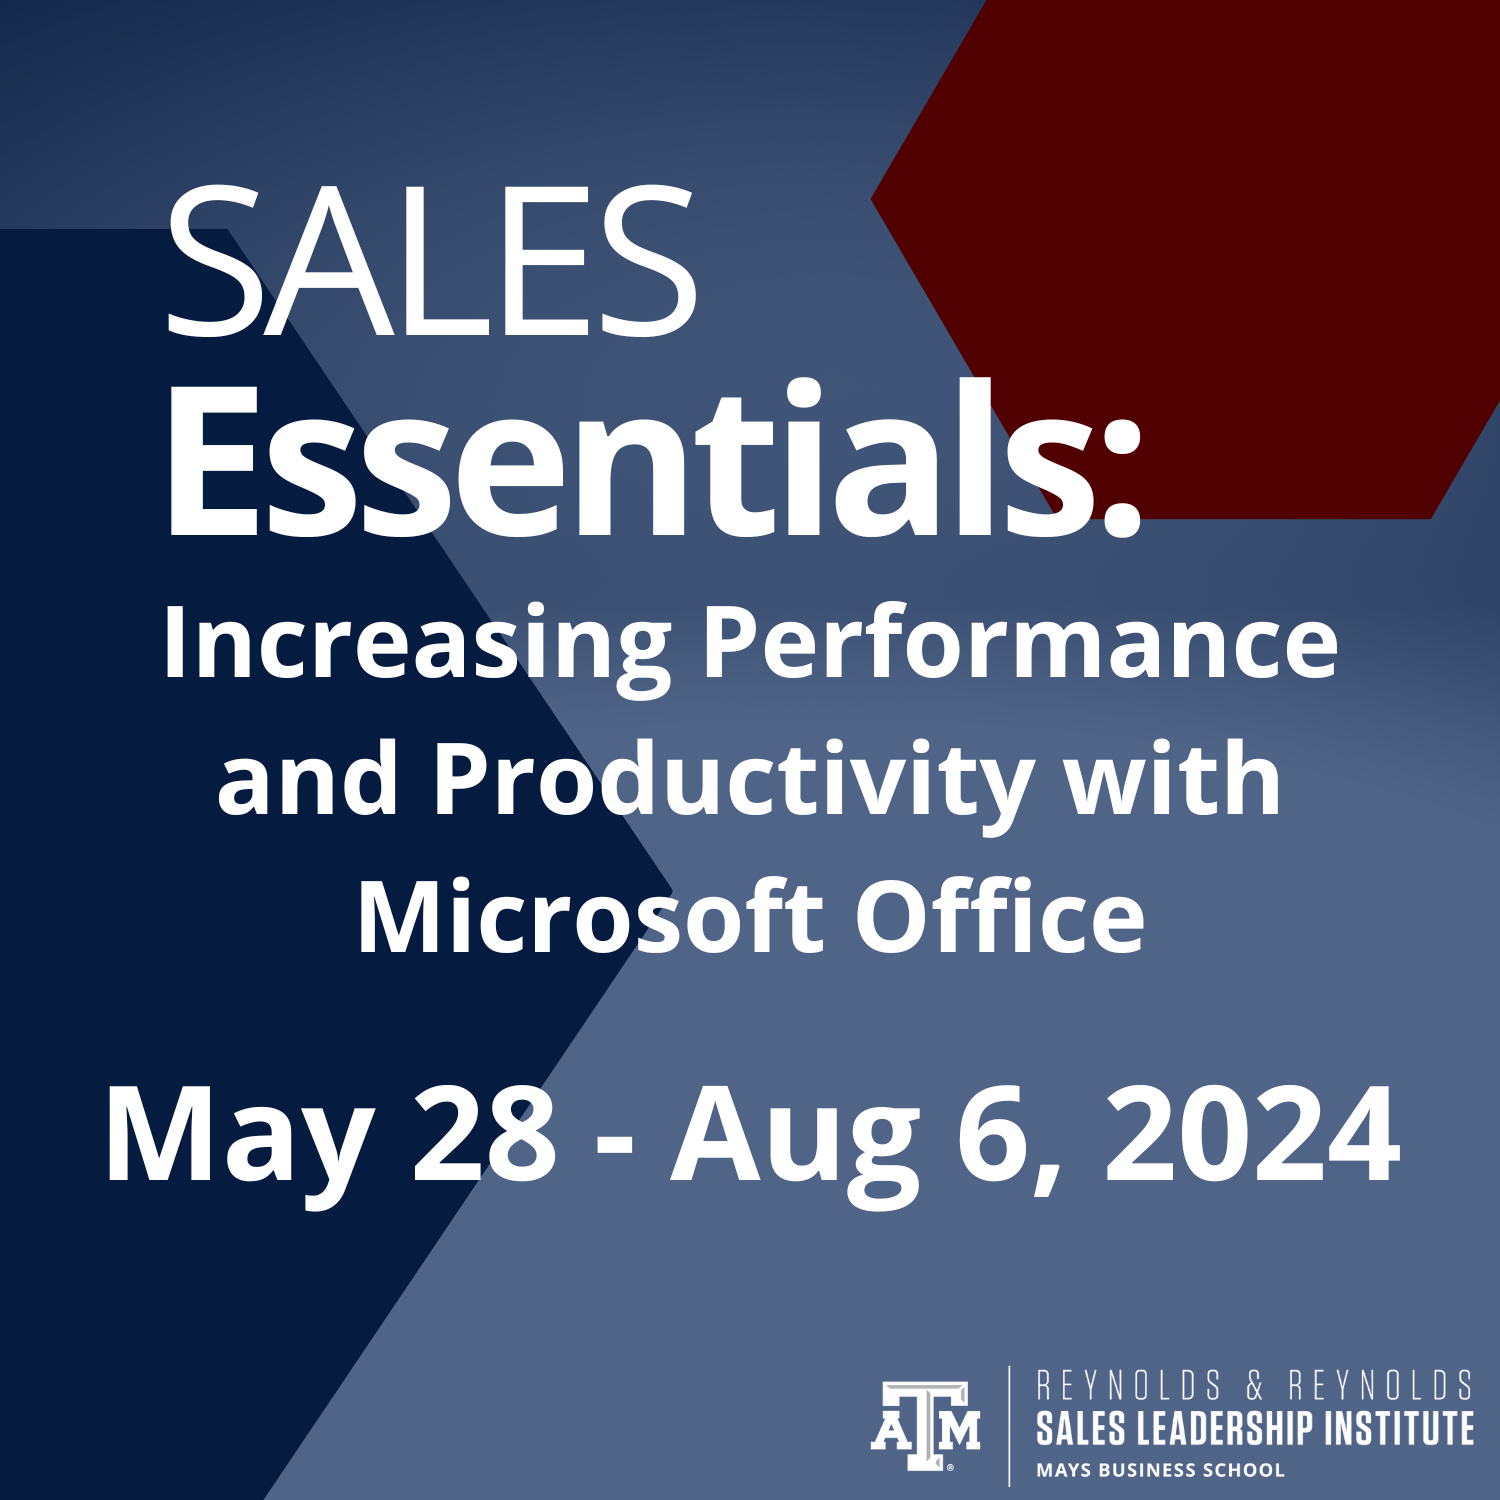 Sales Essentials: Increasing Performance and Productivity with Microsoft Office